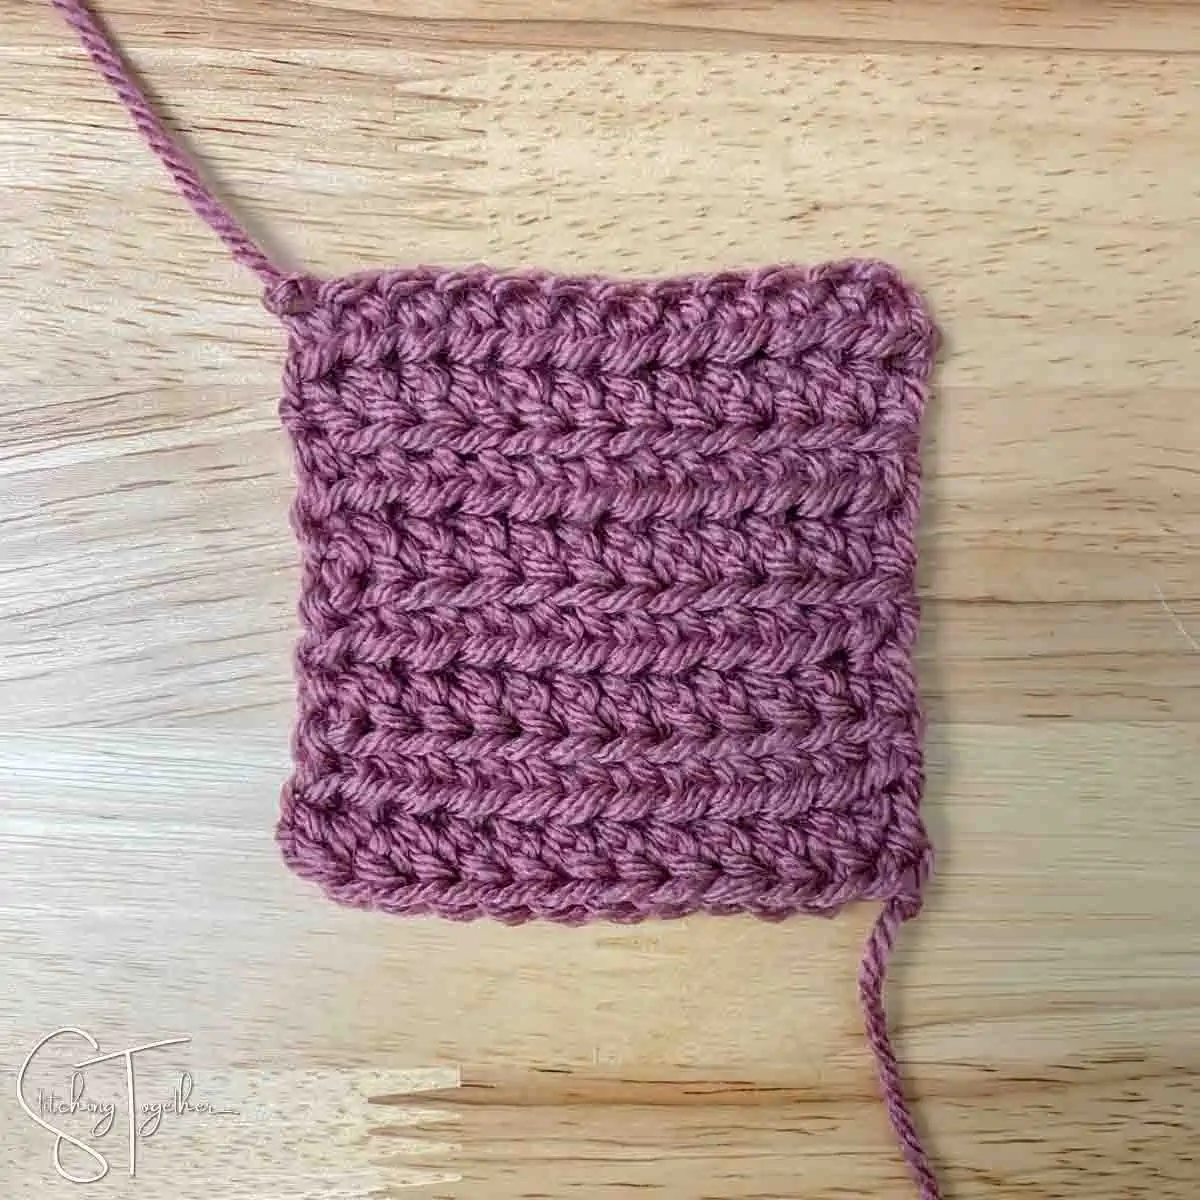 crochet swatch of front loop only hdc